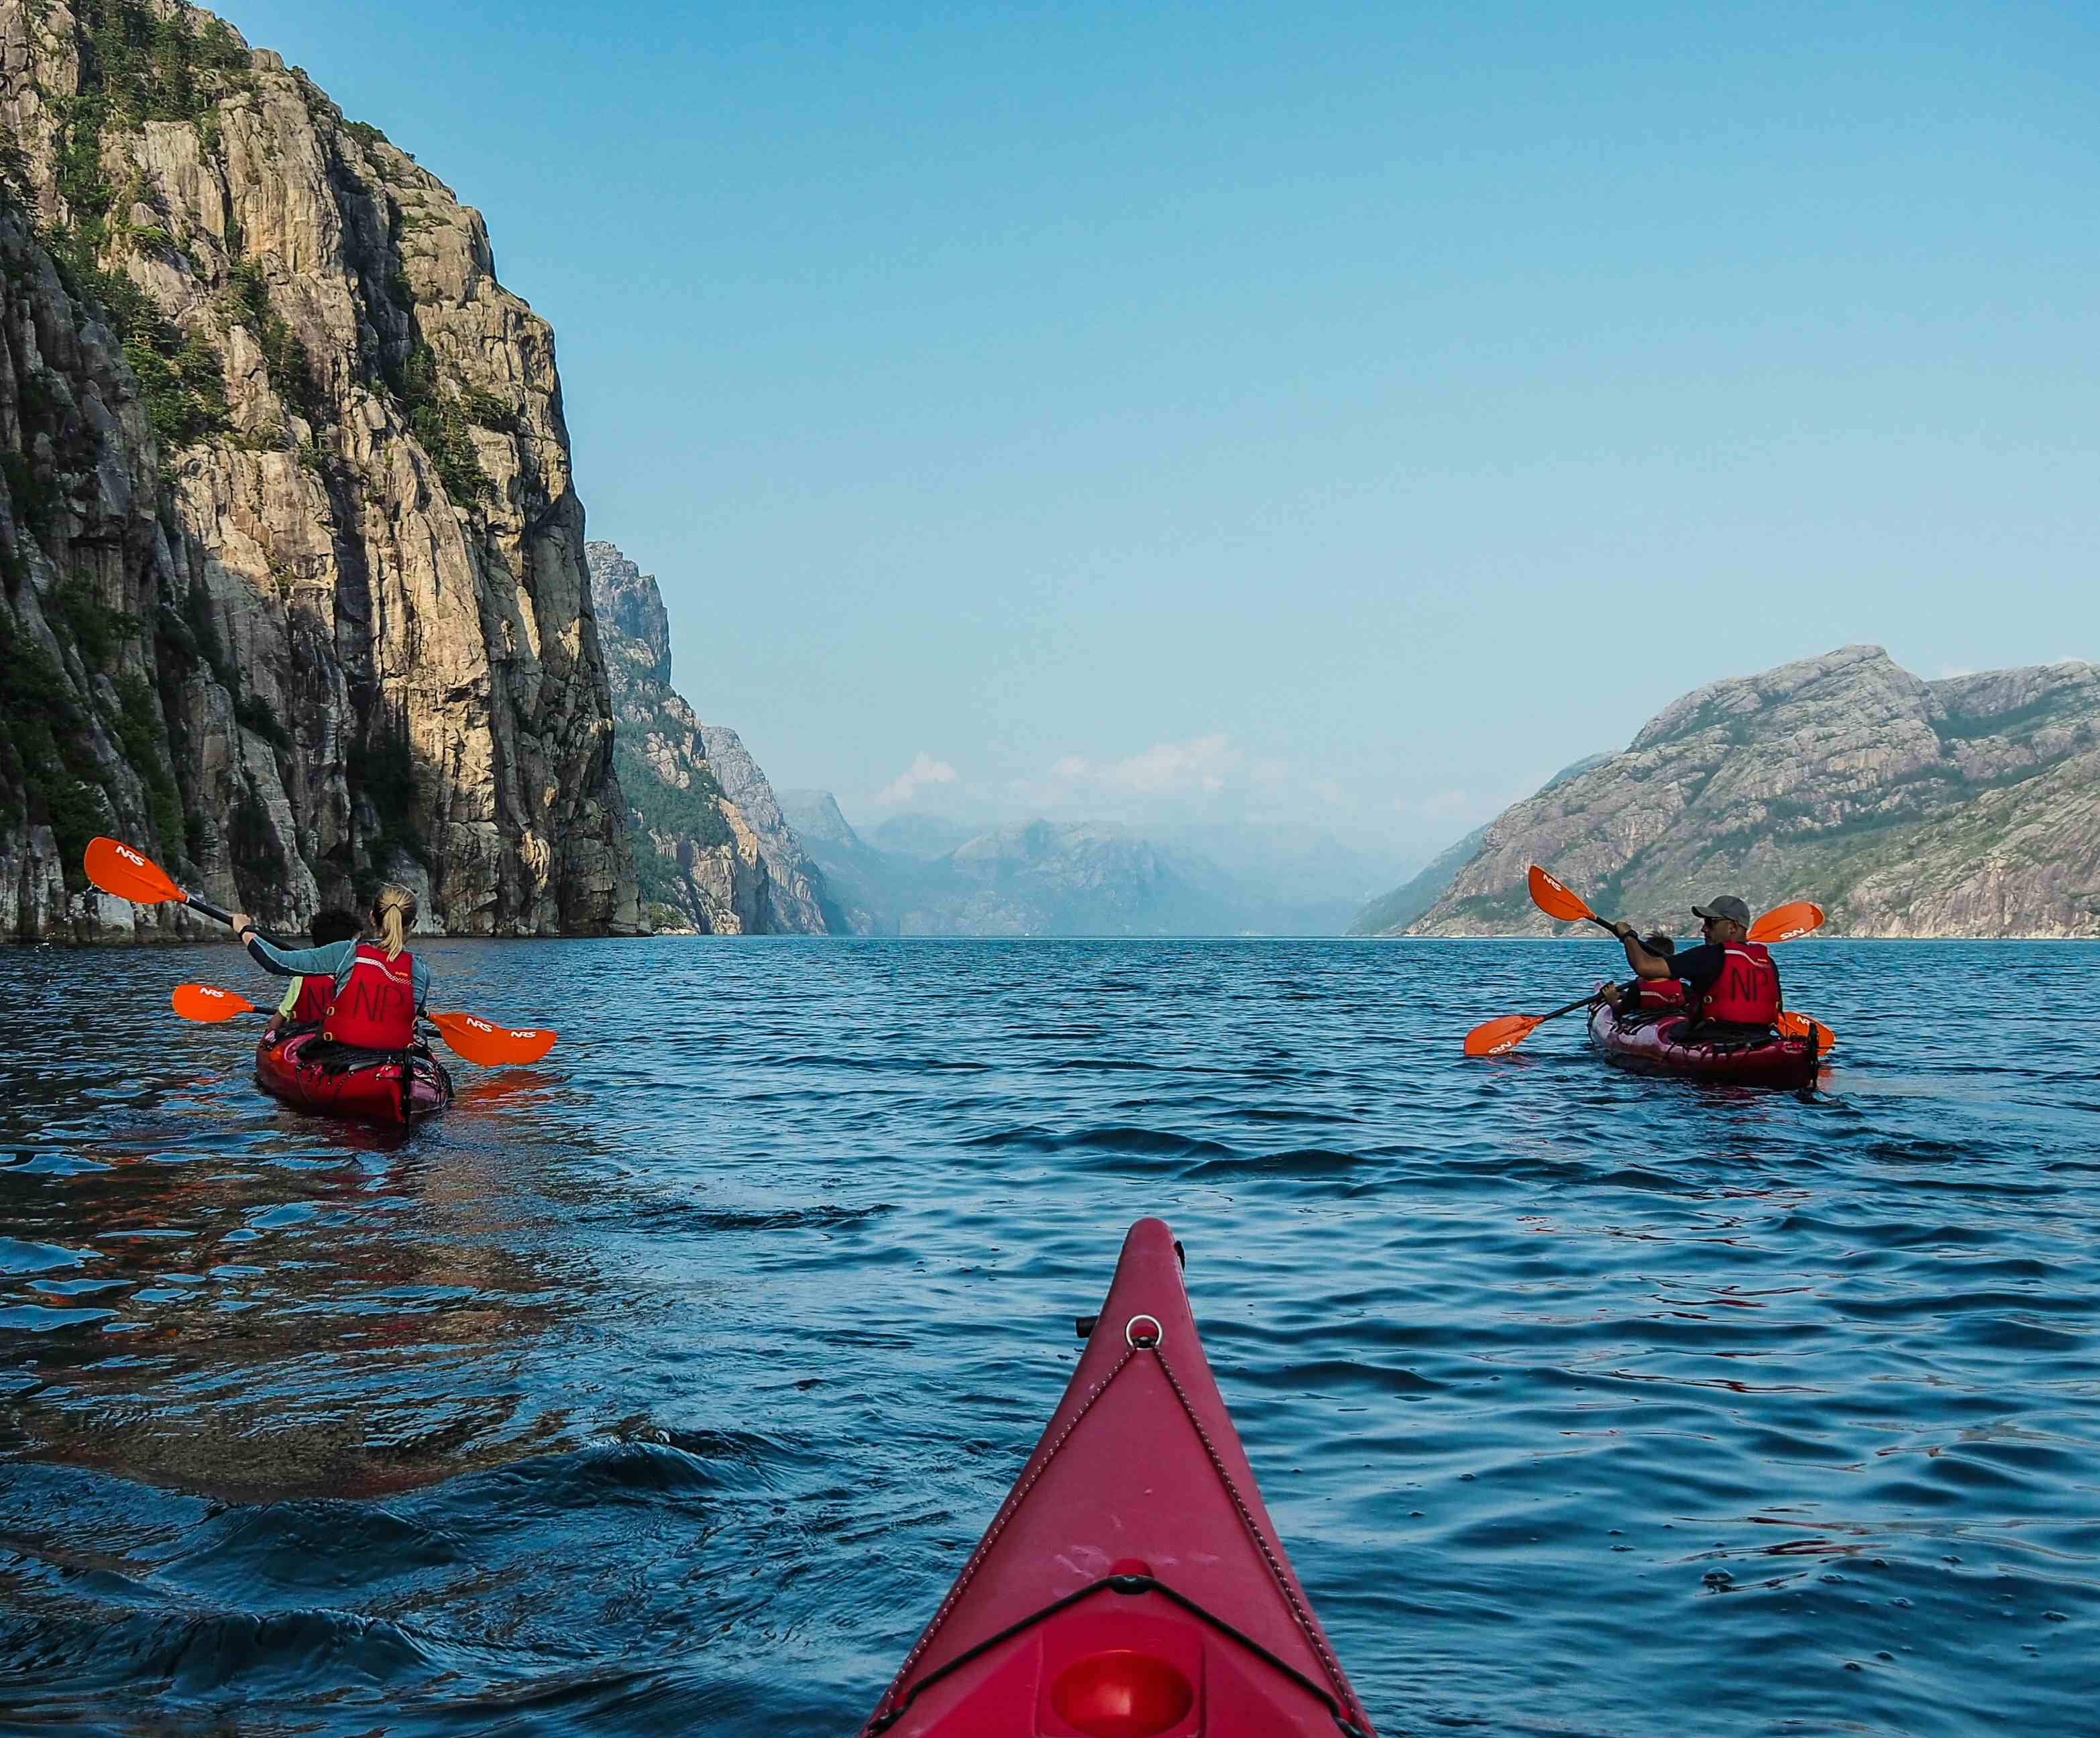 Tow people kayaking in the blue Lysefjord with mountains on each side